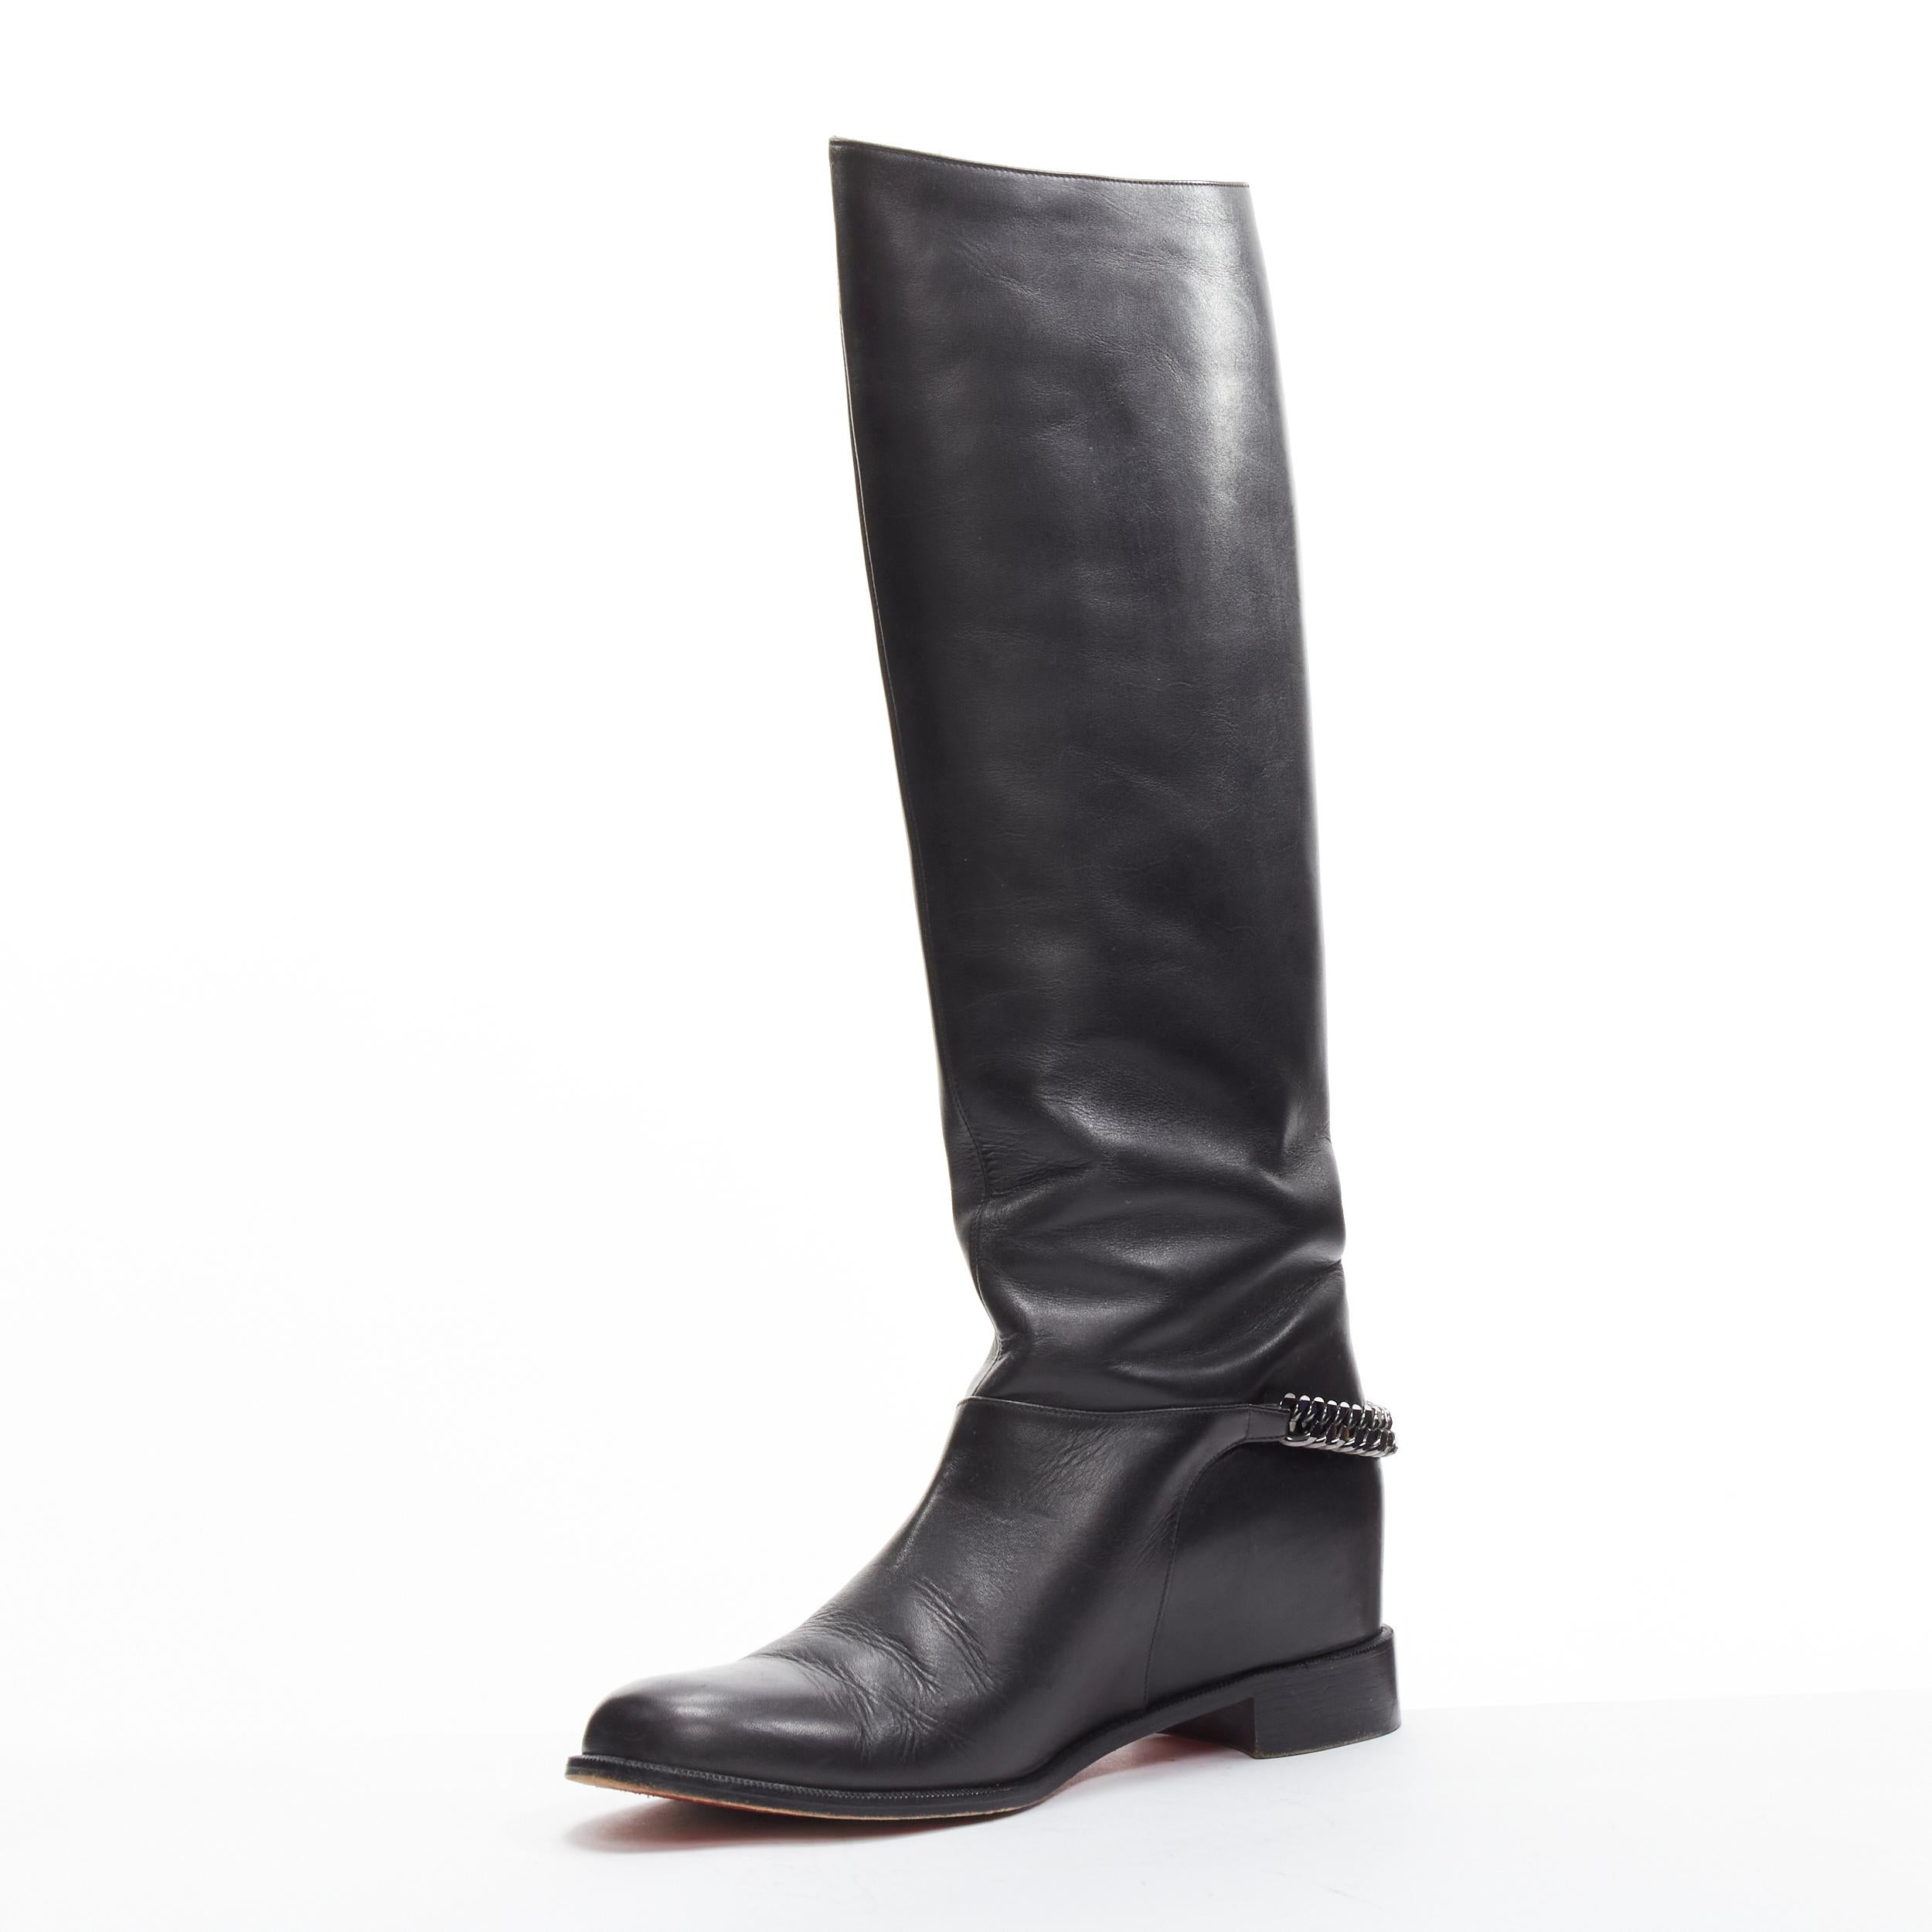 CHRISTIAN LOUBOUTIN Cate silver chain heel black leather wedge riding boots EU40 For Sale 1